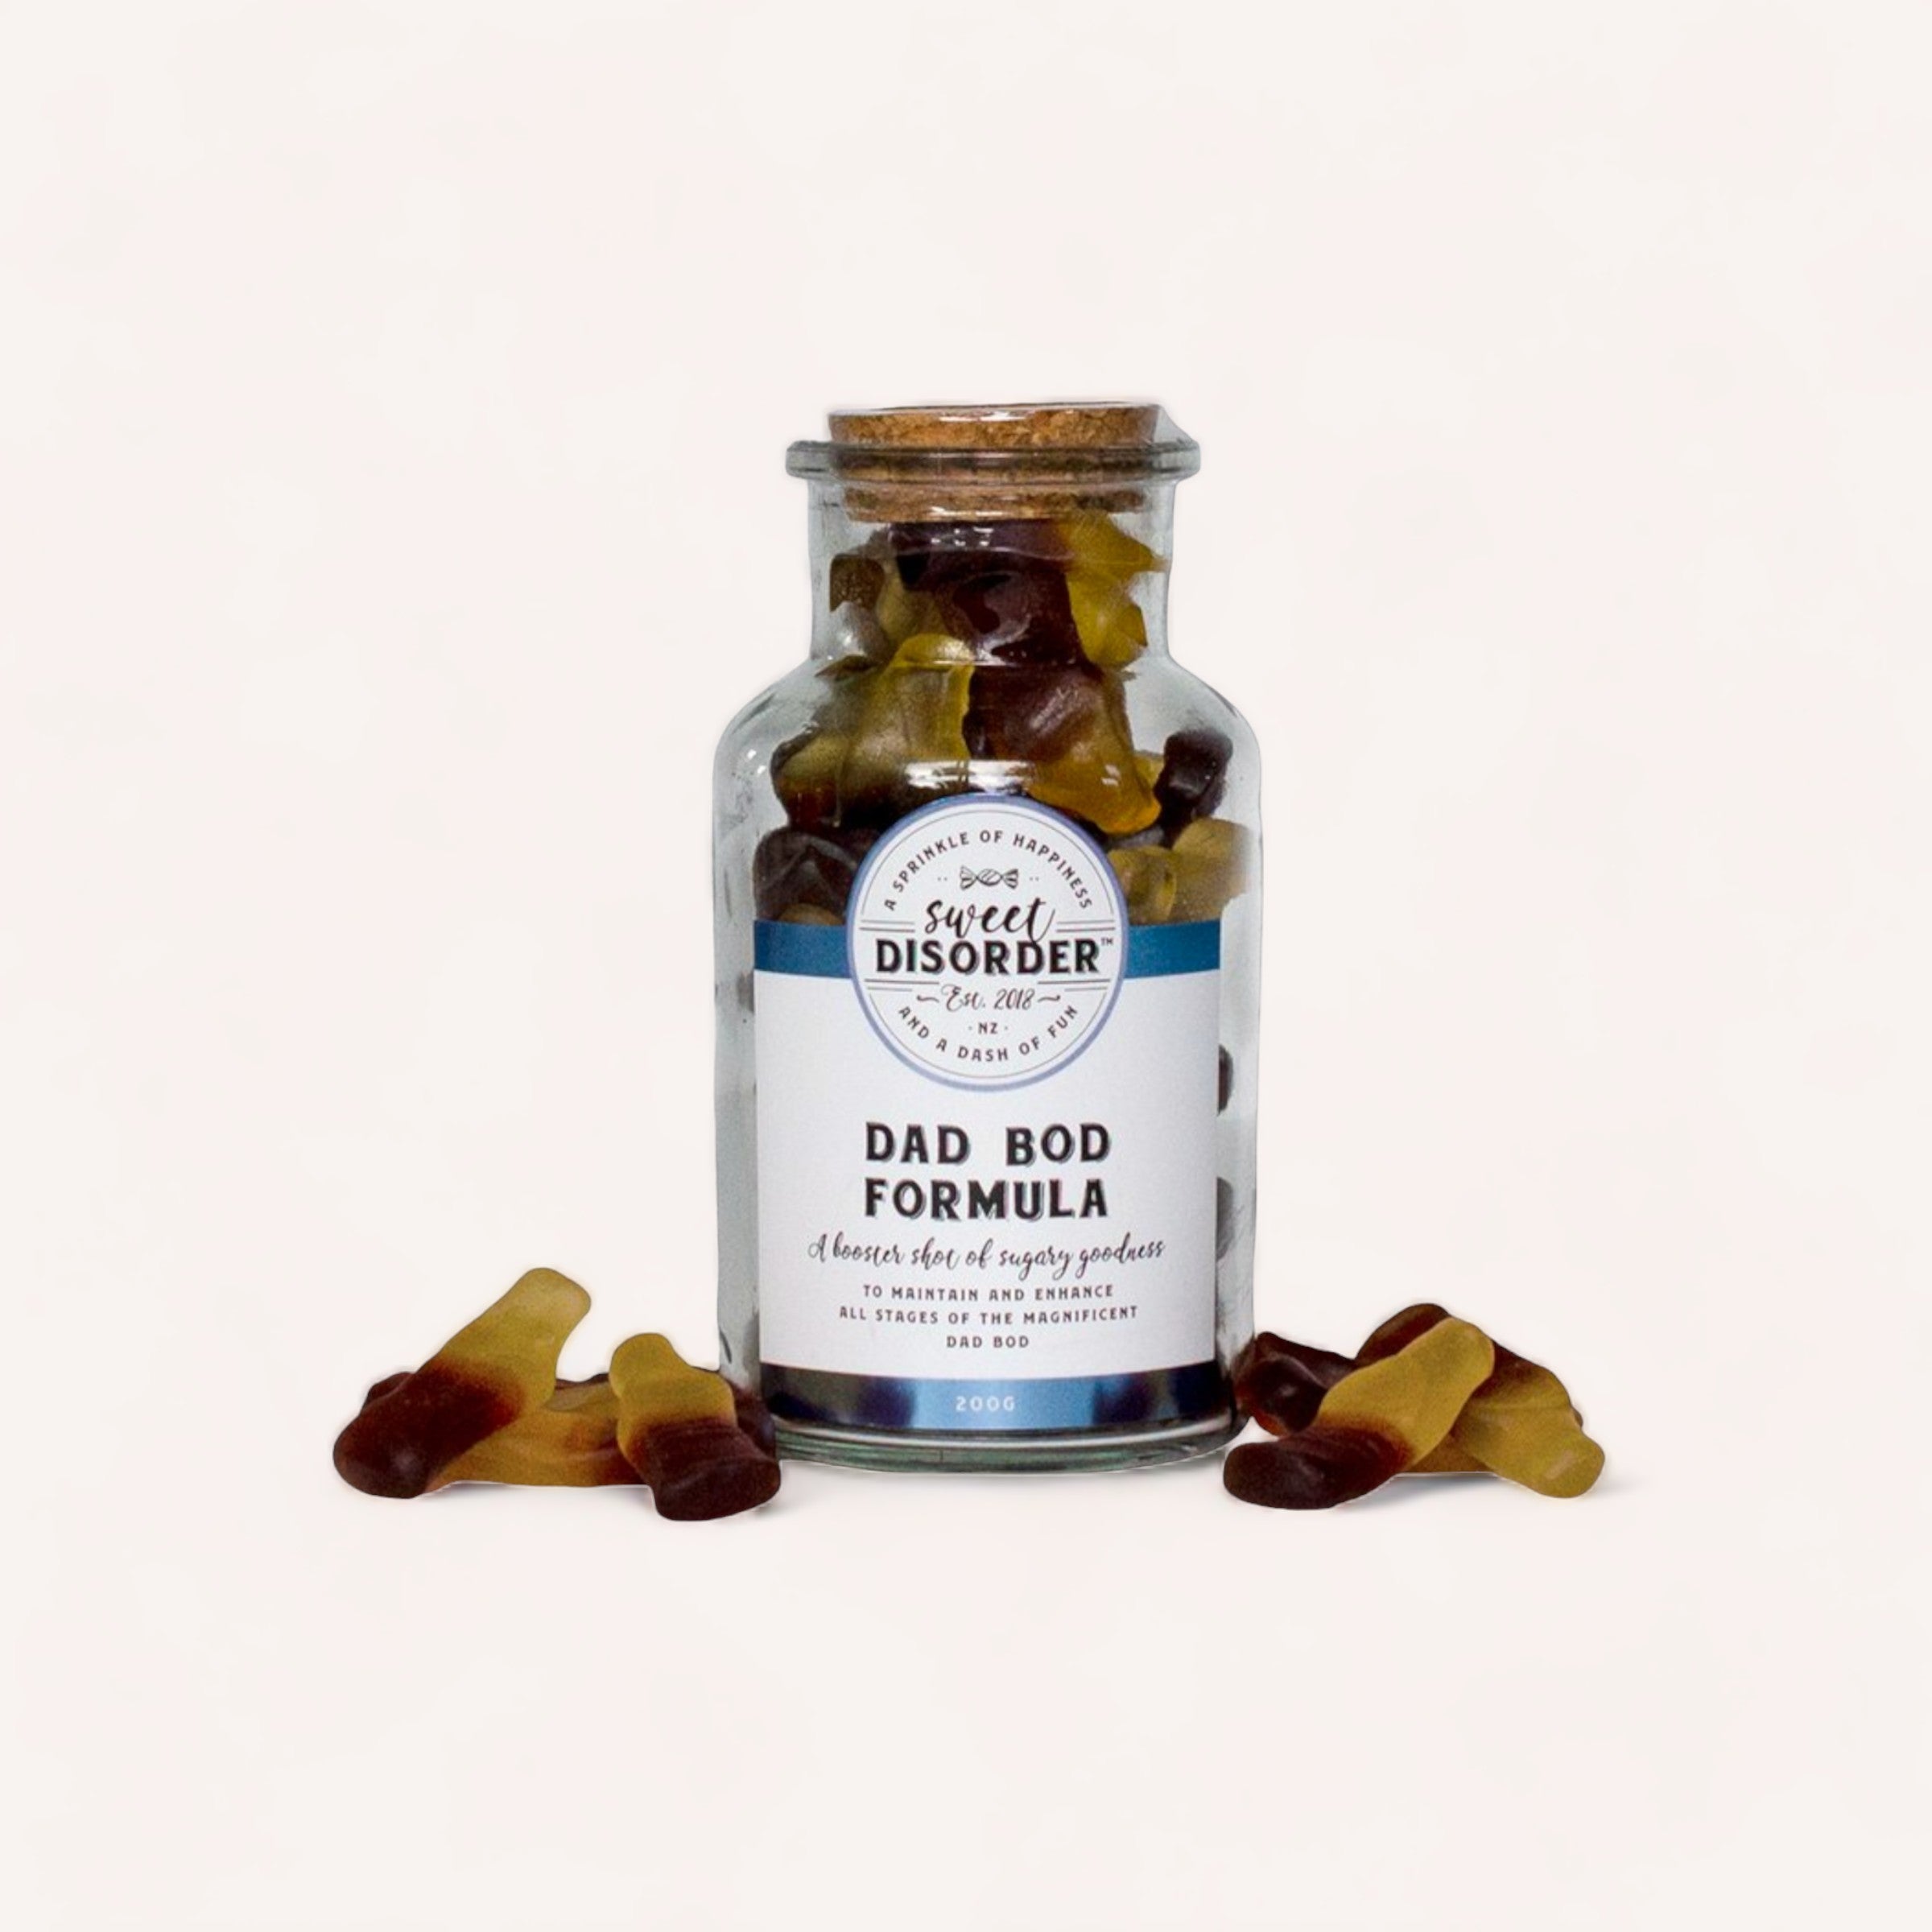 A jar labeled "Dad Bod Formula Lollies" by Sweet Disorder, filled with cola flavoured gummy bear candies, playfully suggesting a cheeky health supplement for achieving a relaxed physique.